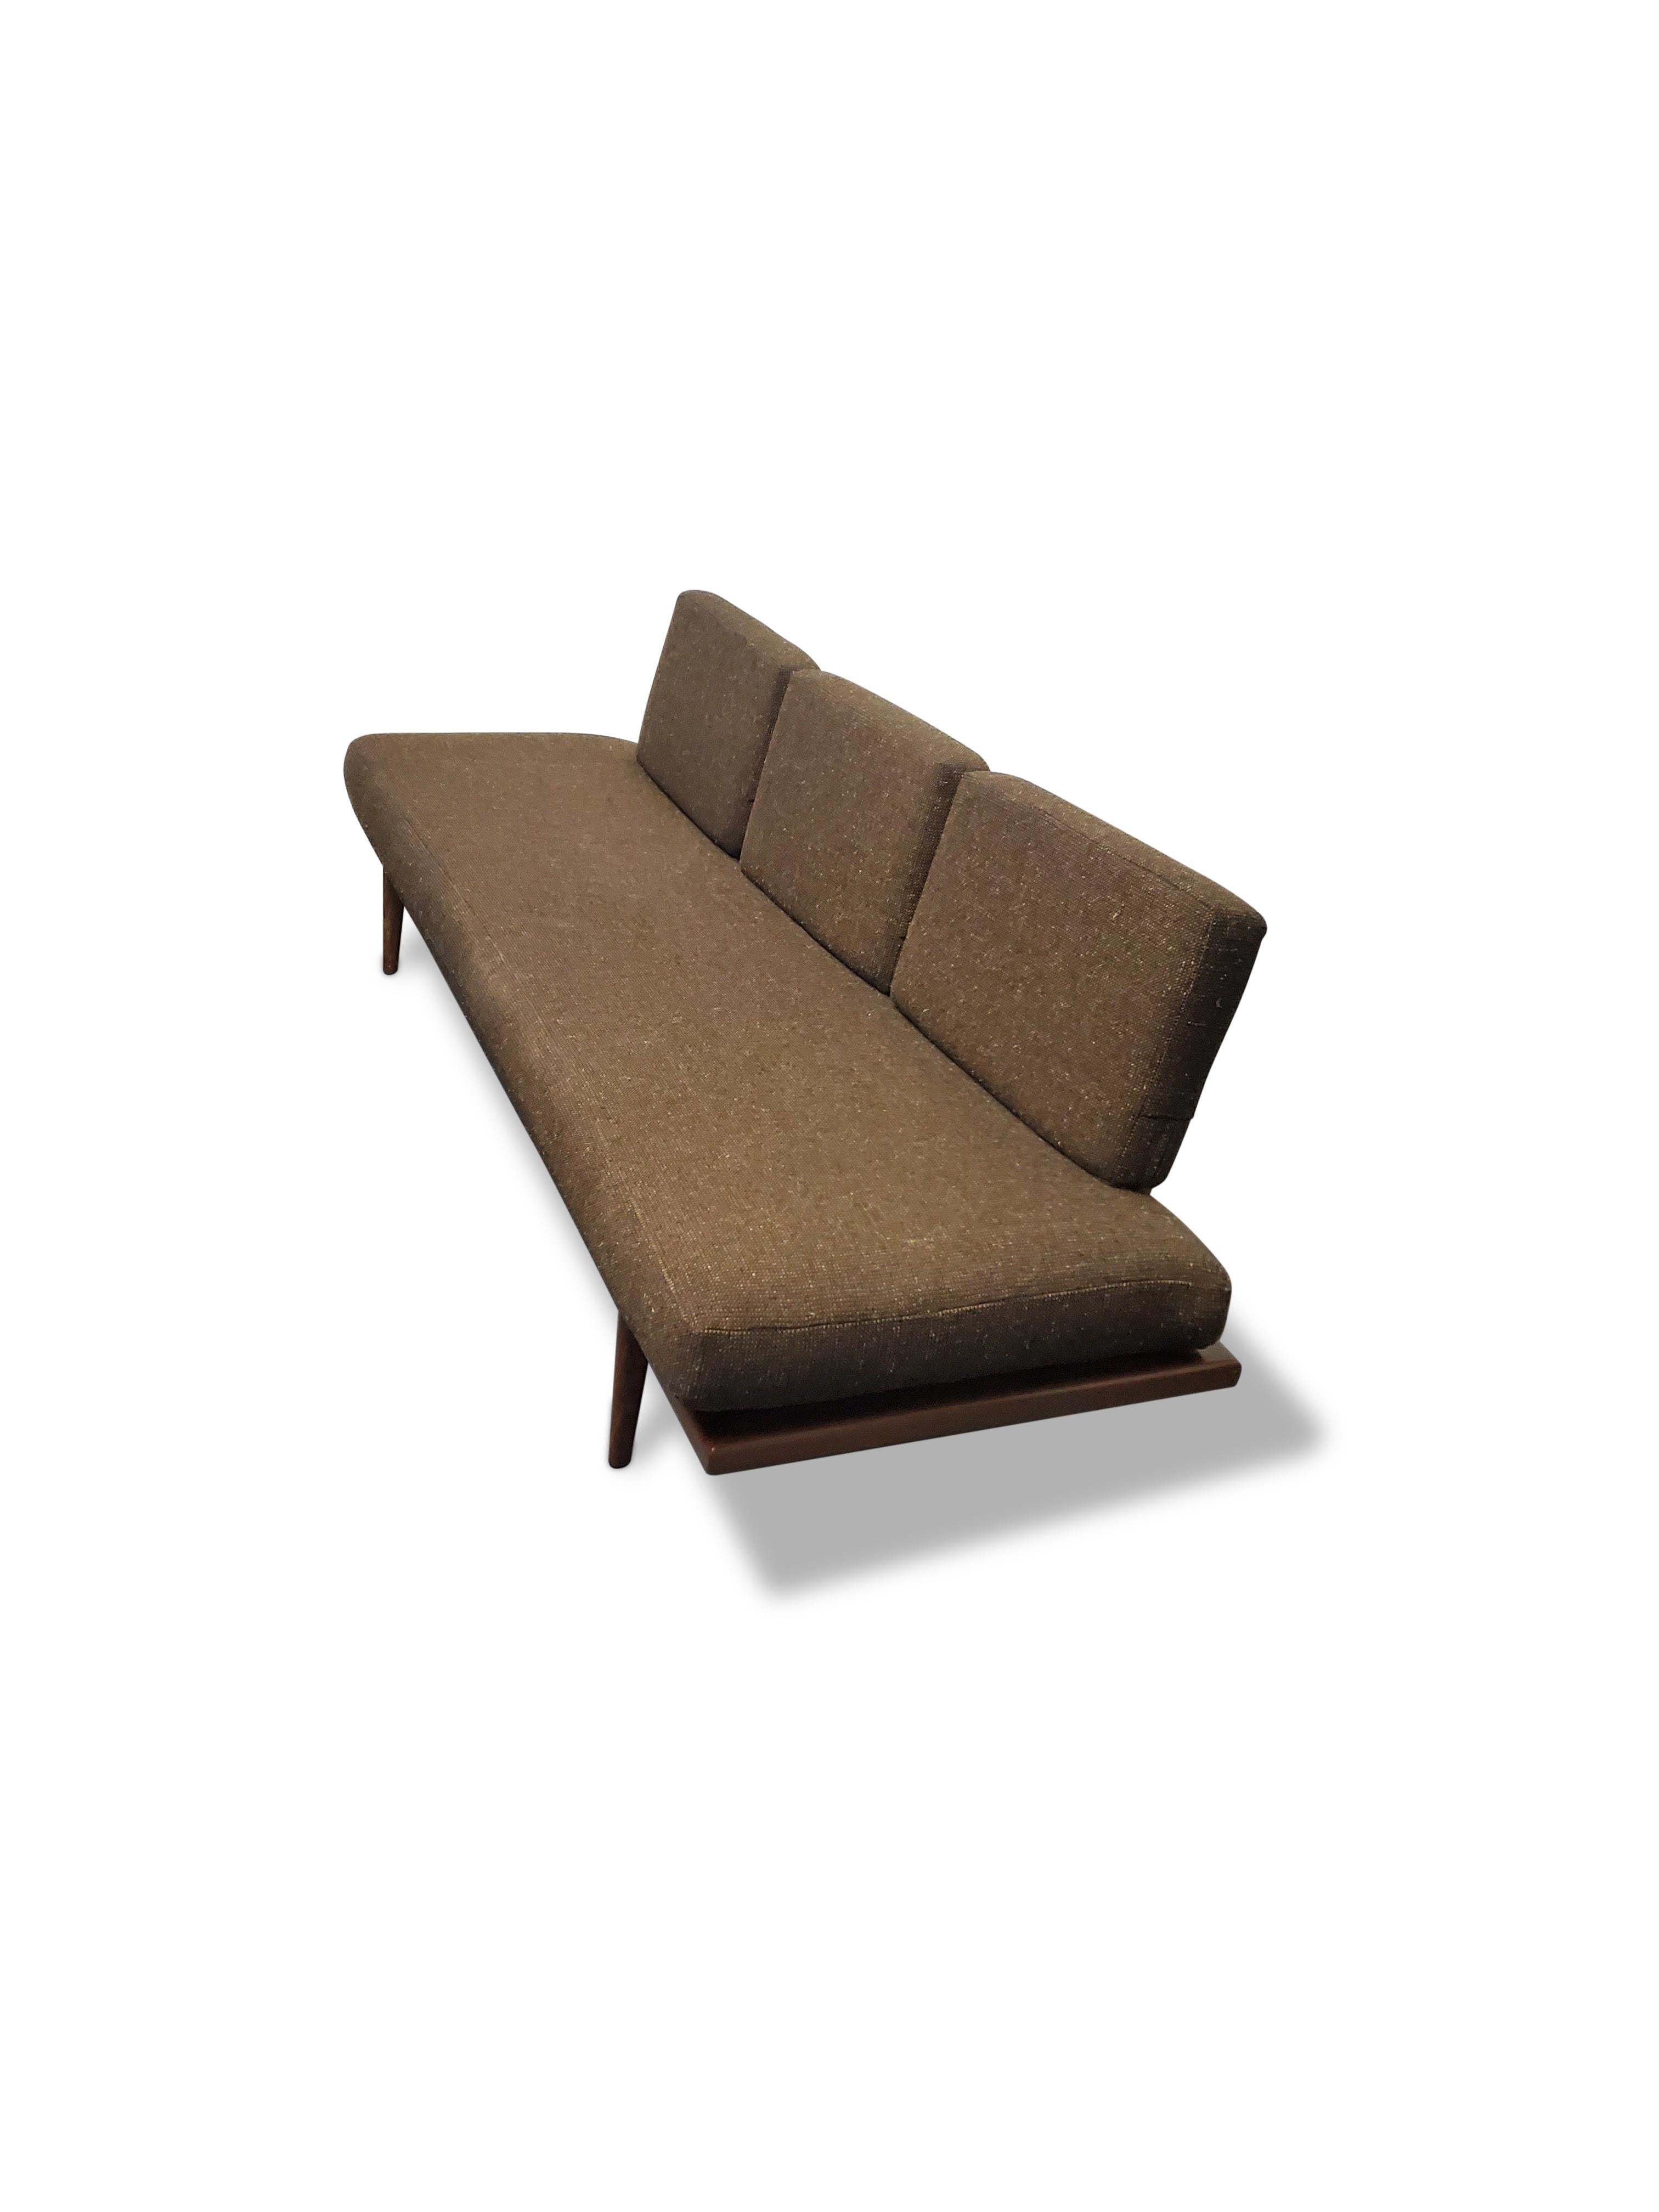 American Mel Smilow Daybed Couch For Sale